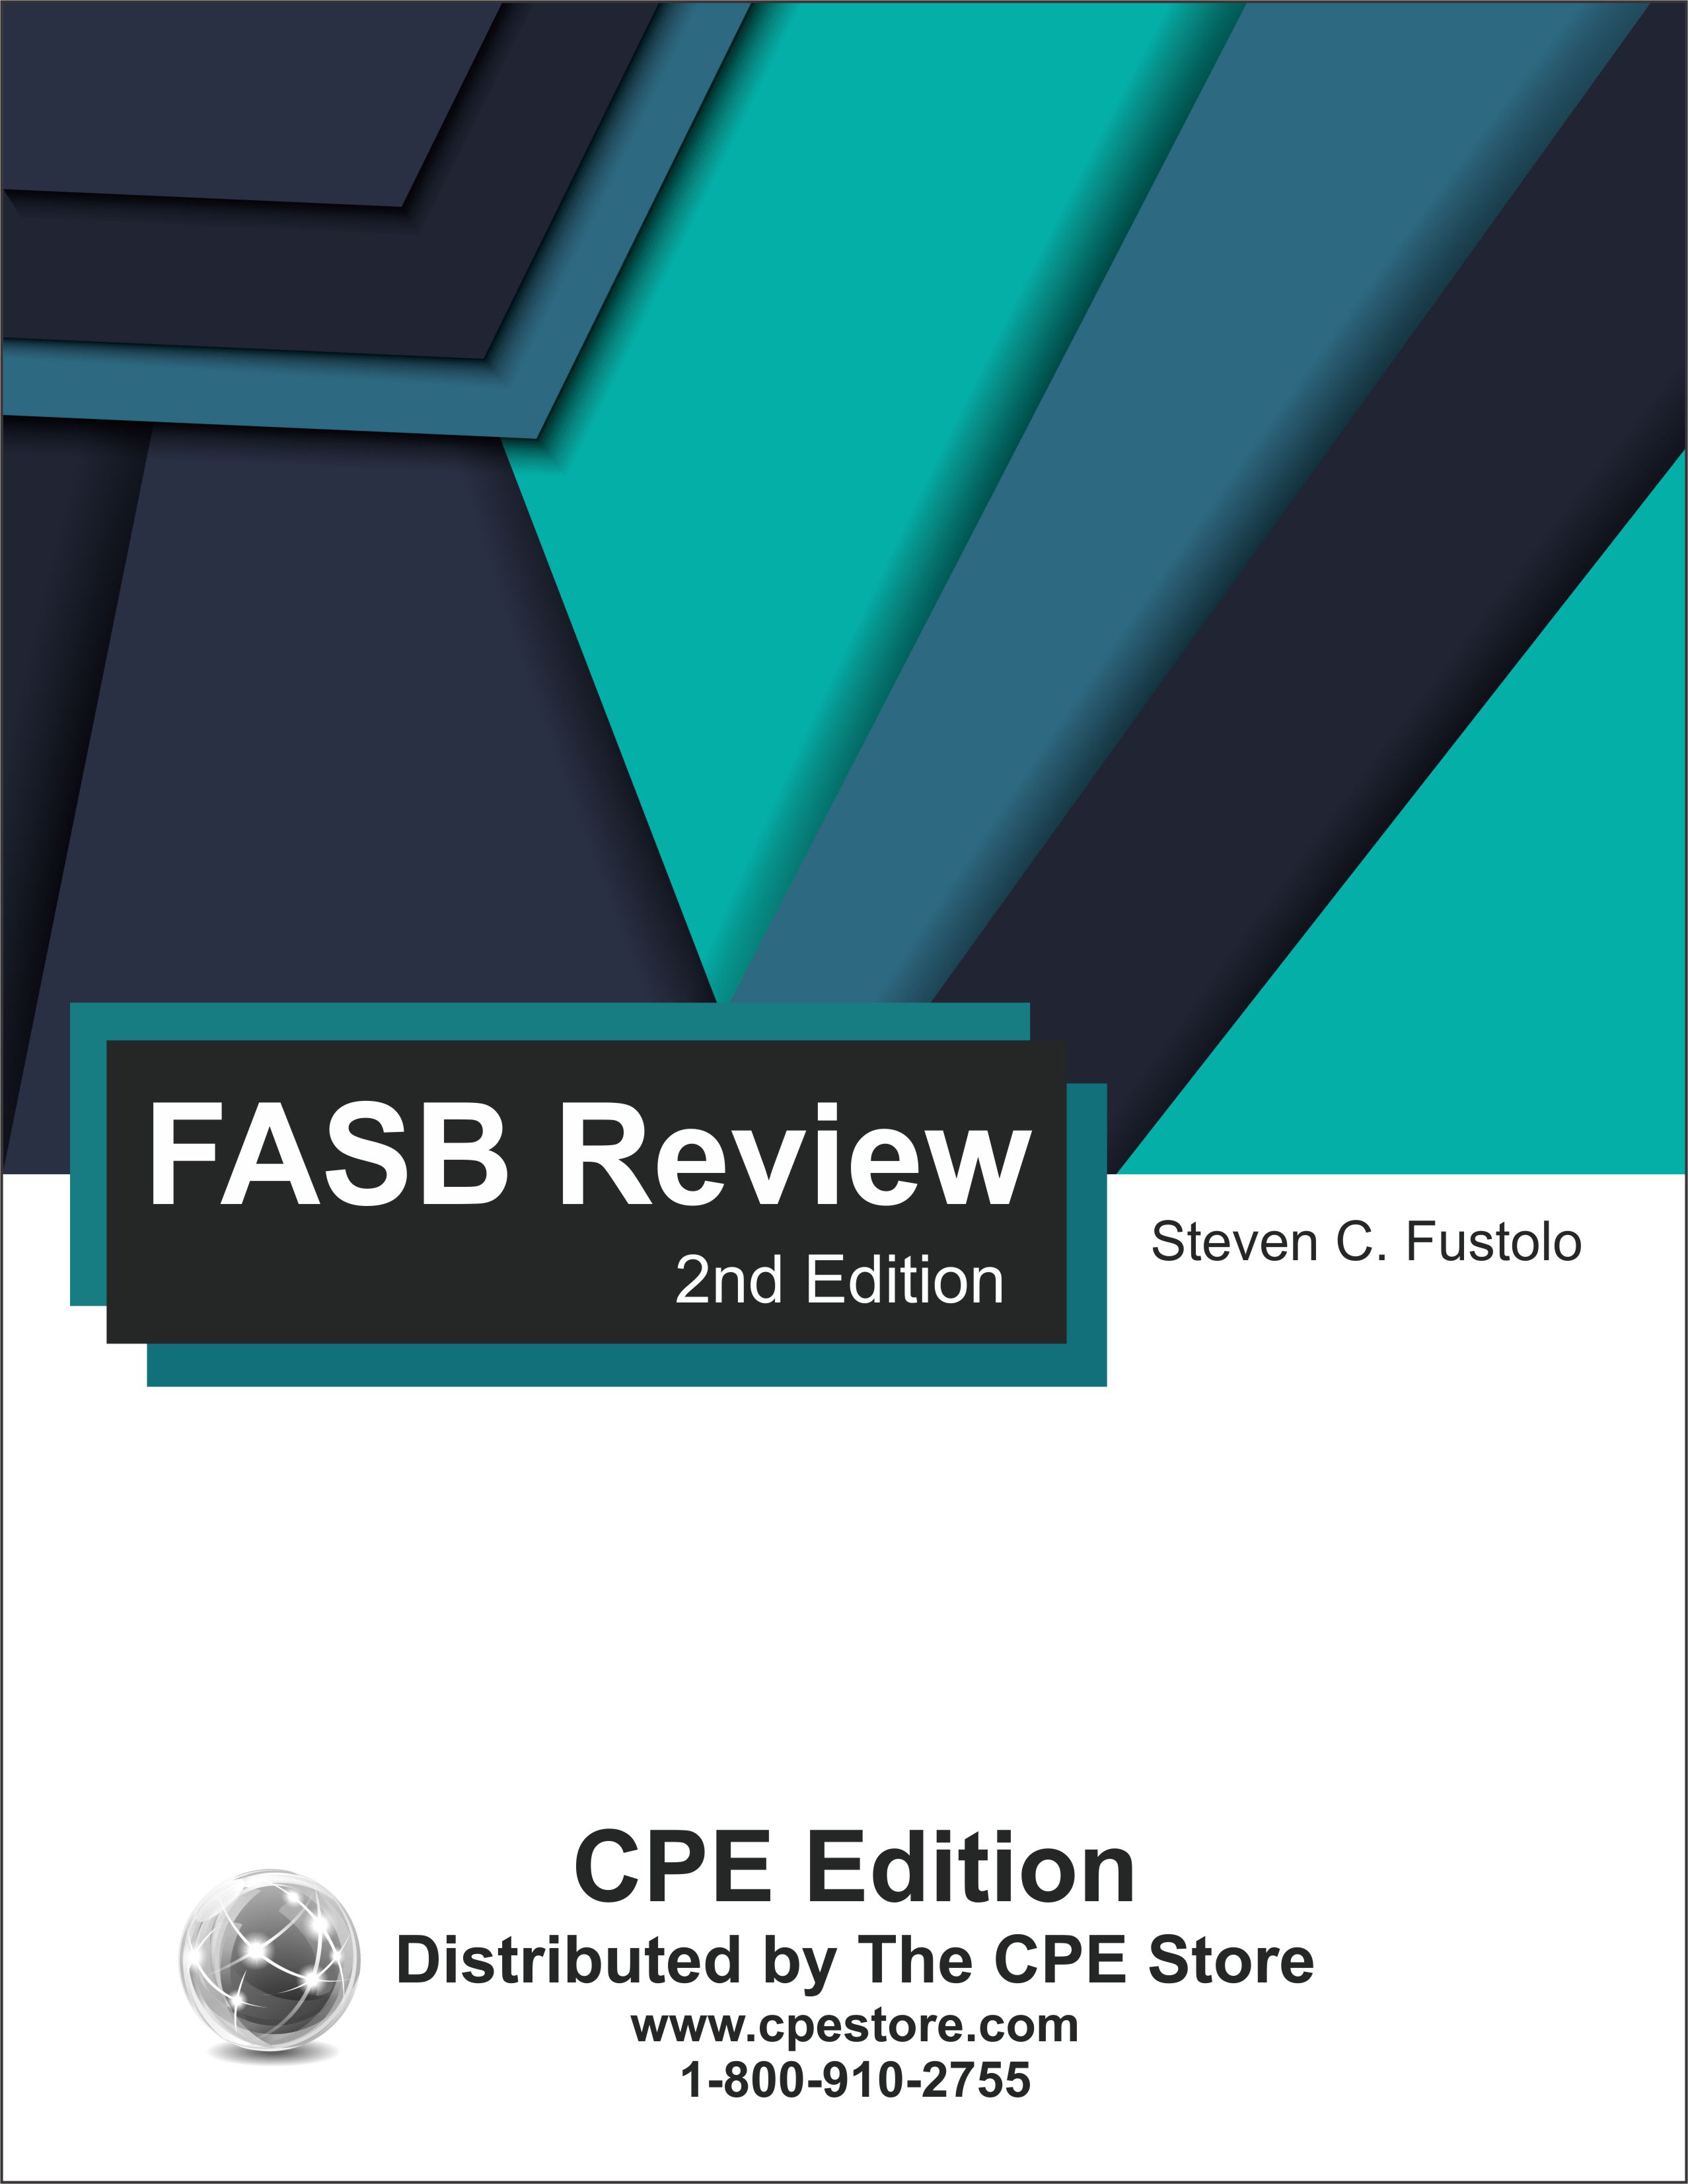 FASB Review